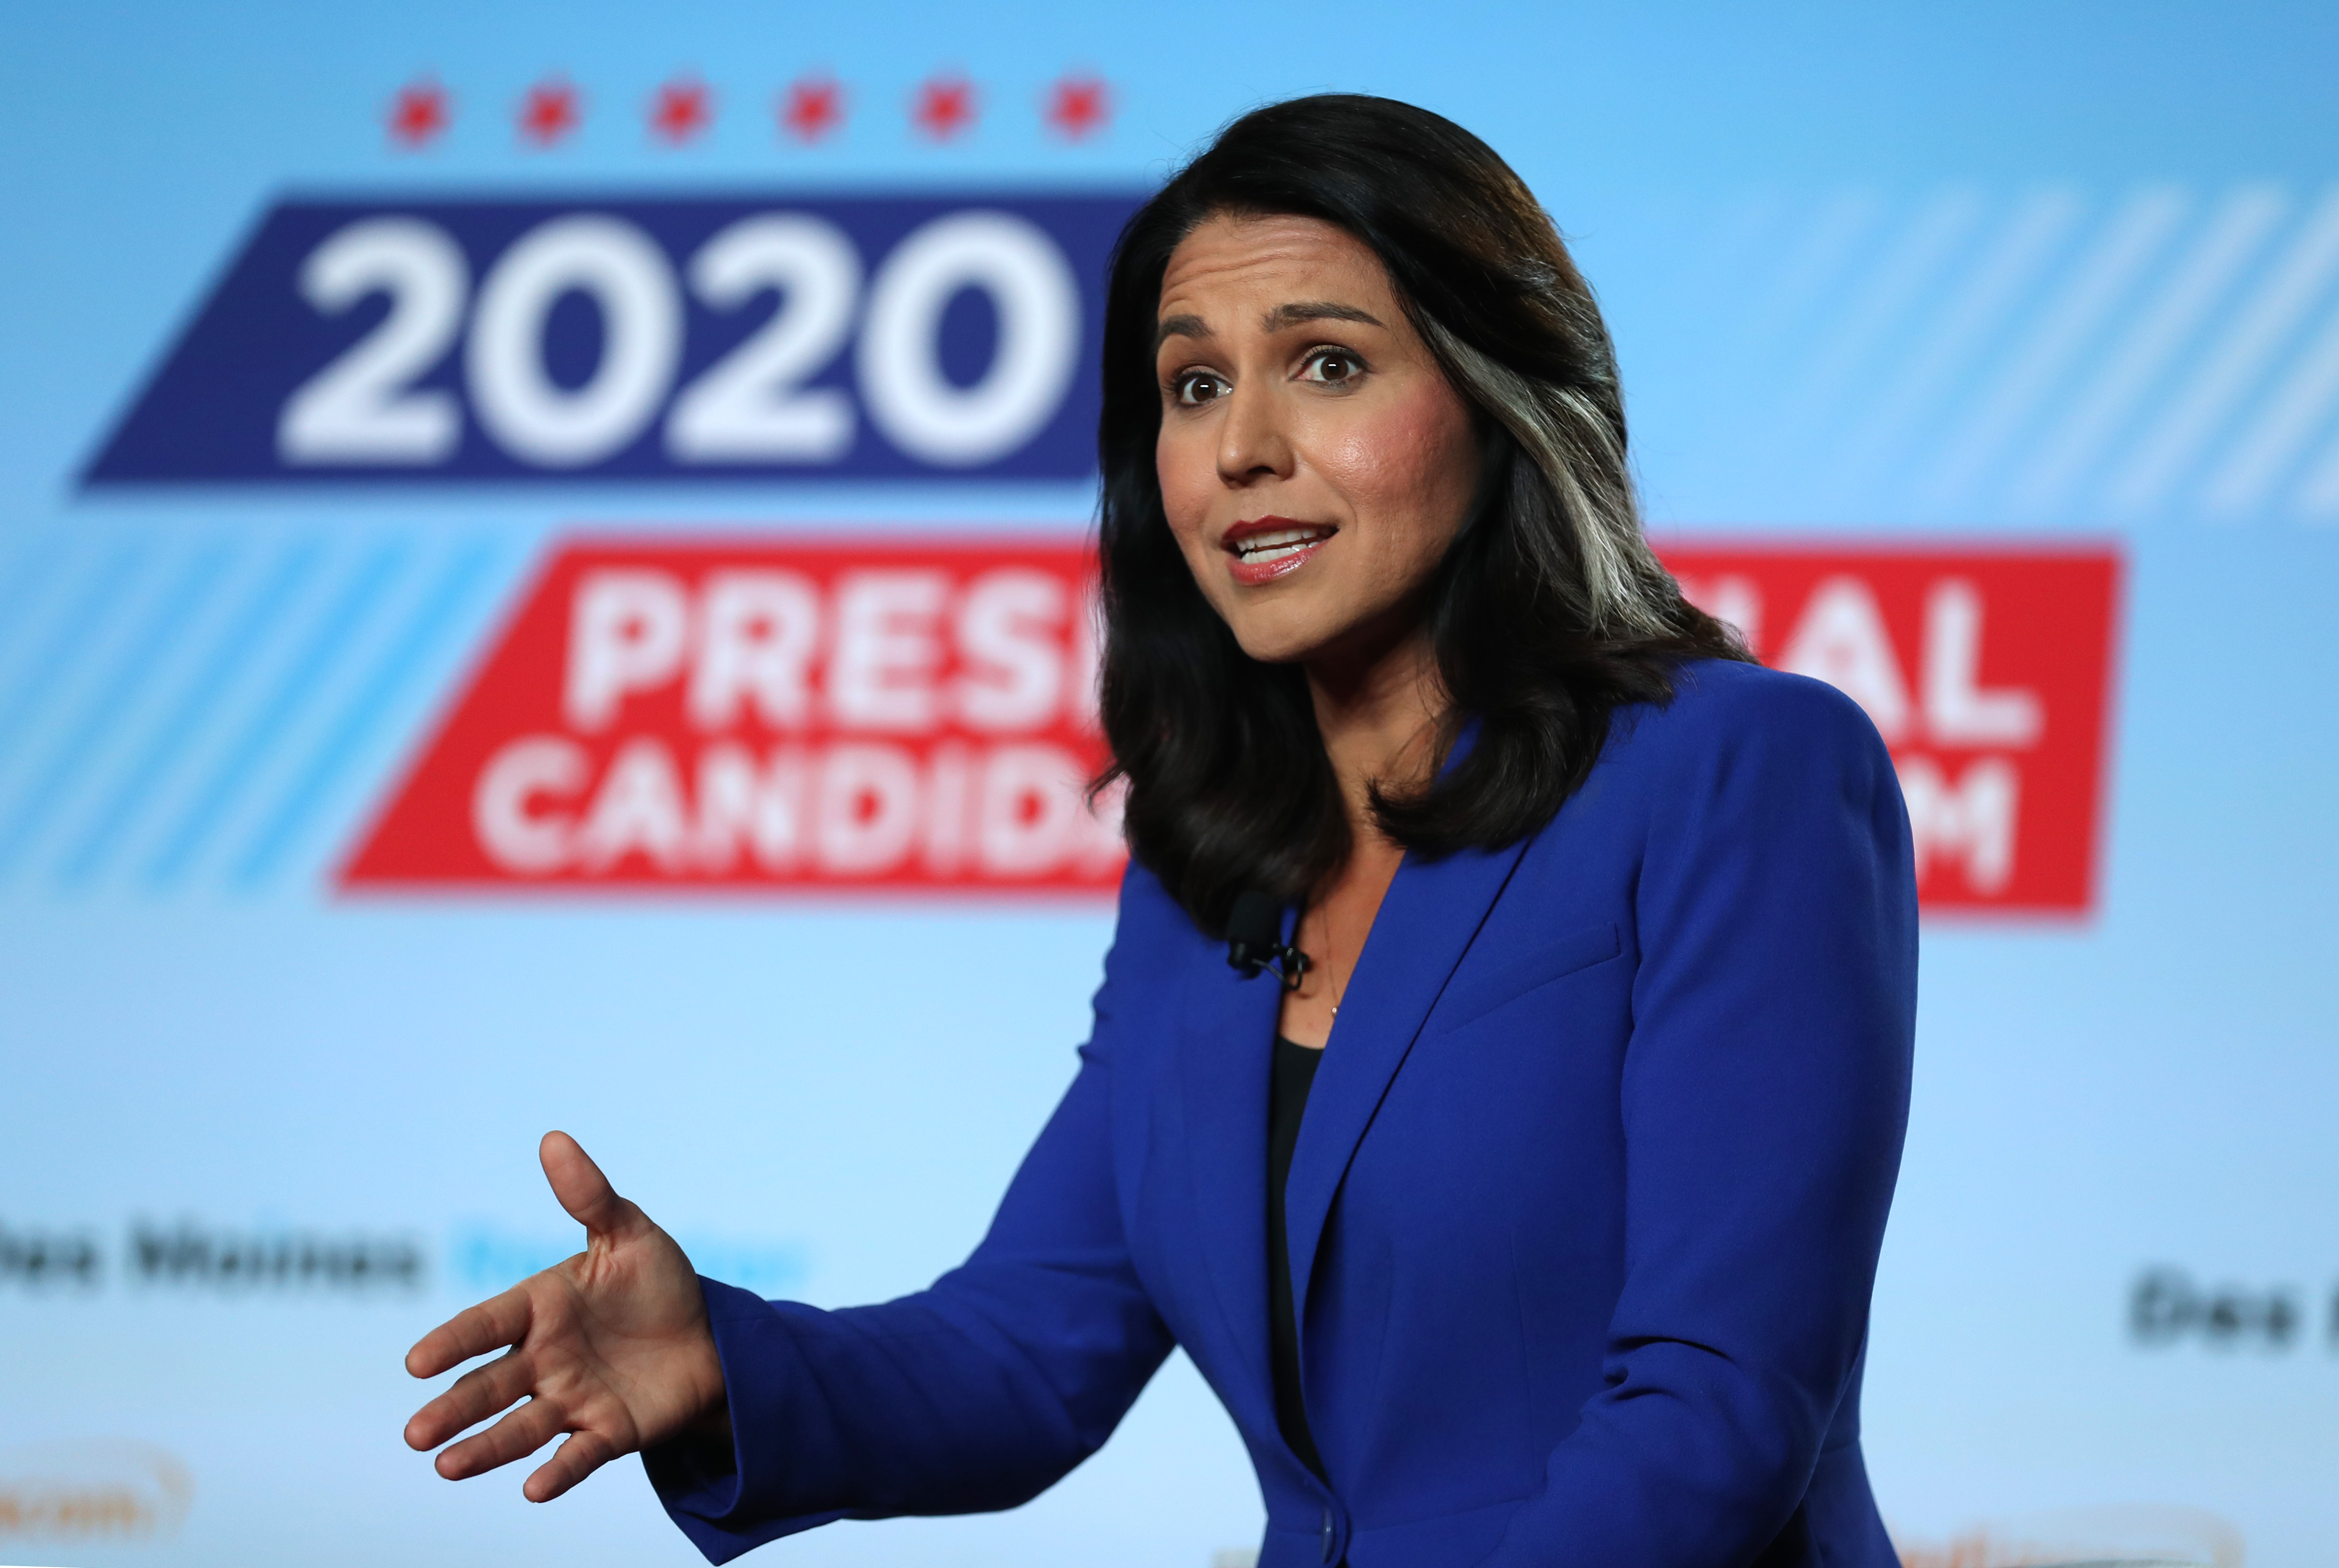 Presidential candidate Tulsi Gabbard sues Google for ad censorship | Ars Technica4957 x 3324